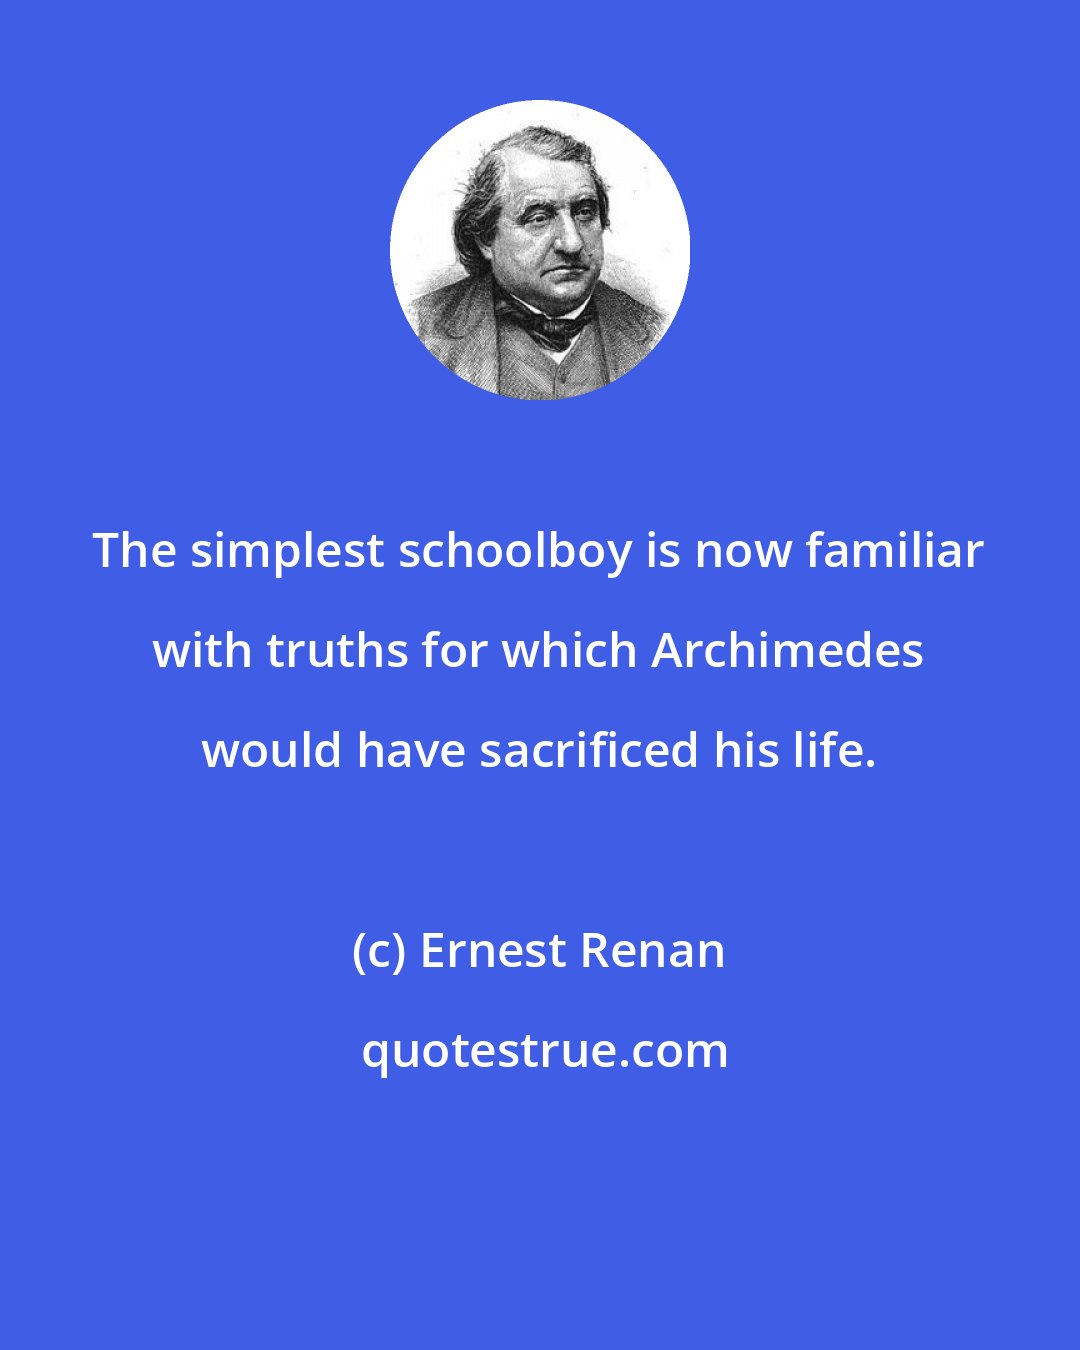 Ernest Renan: The simplest schoolboy is now familiar with truths for which Archimedes would have sacrificed his life.